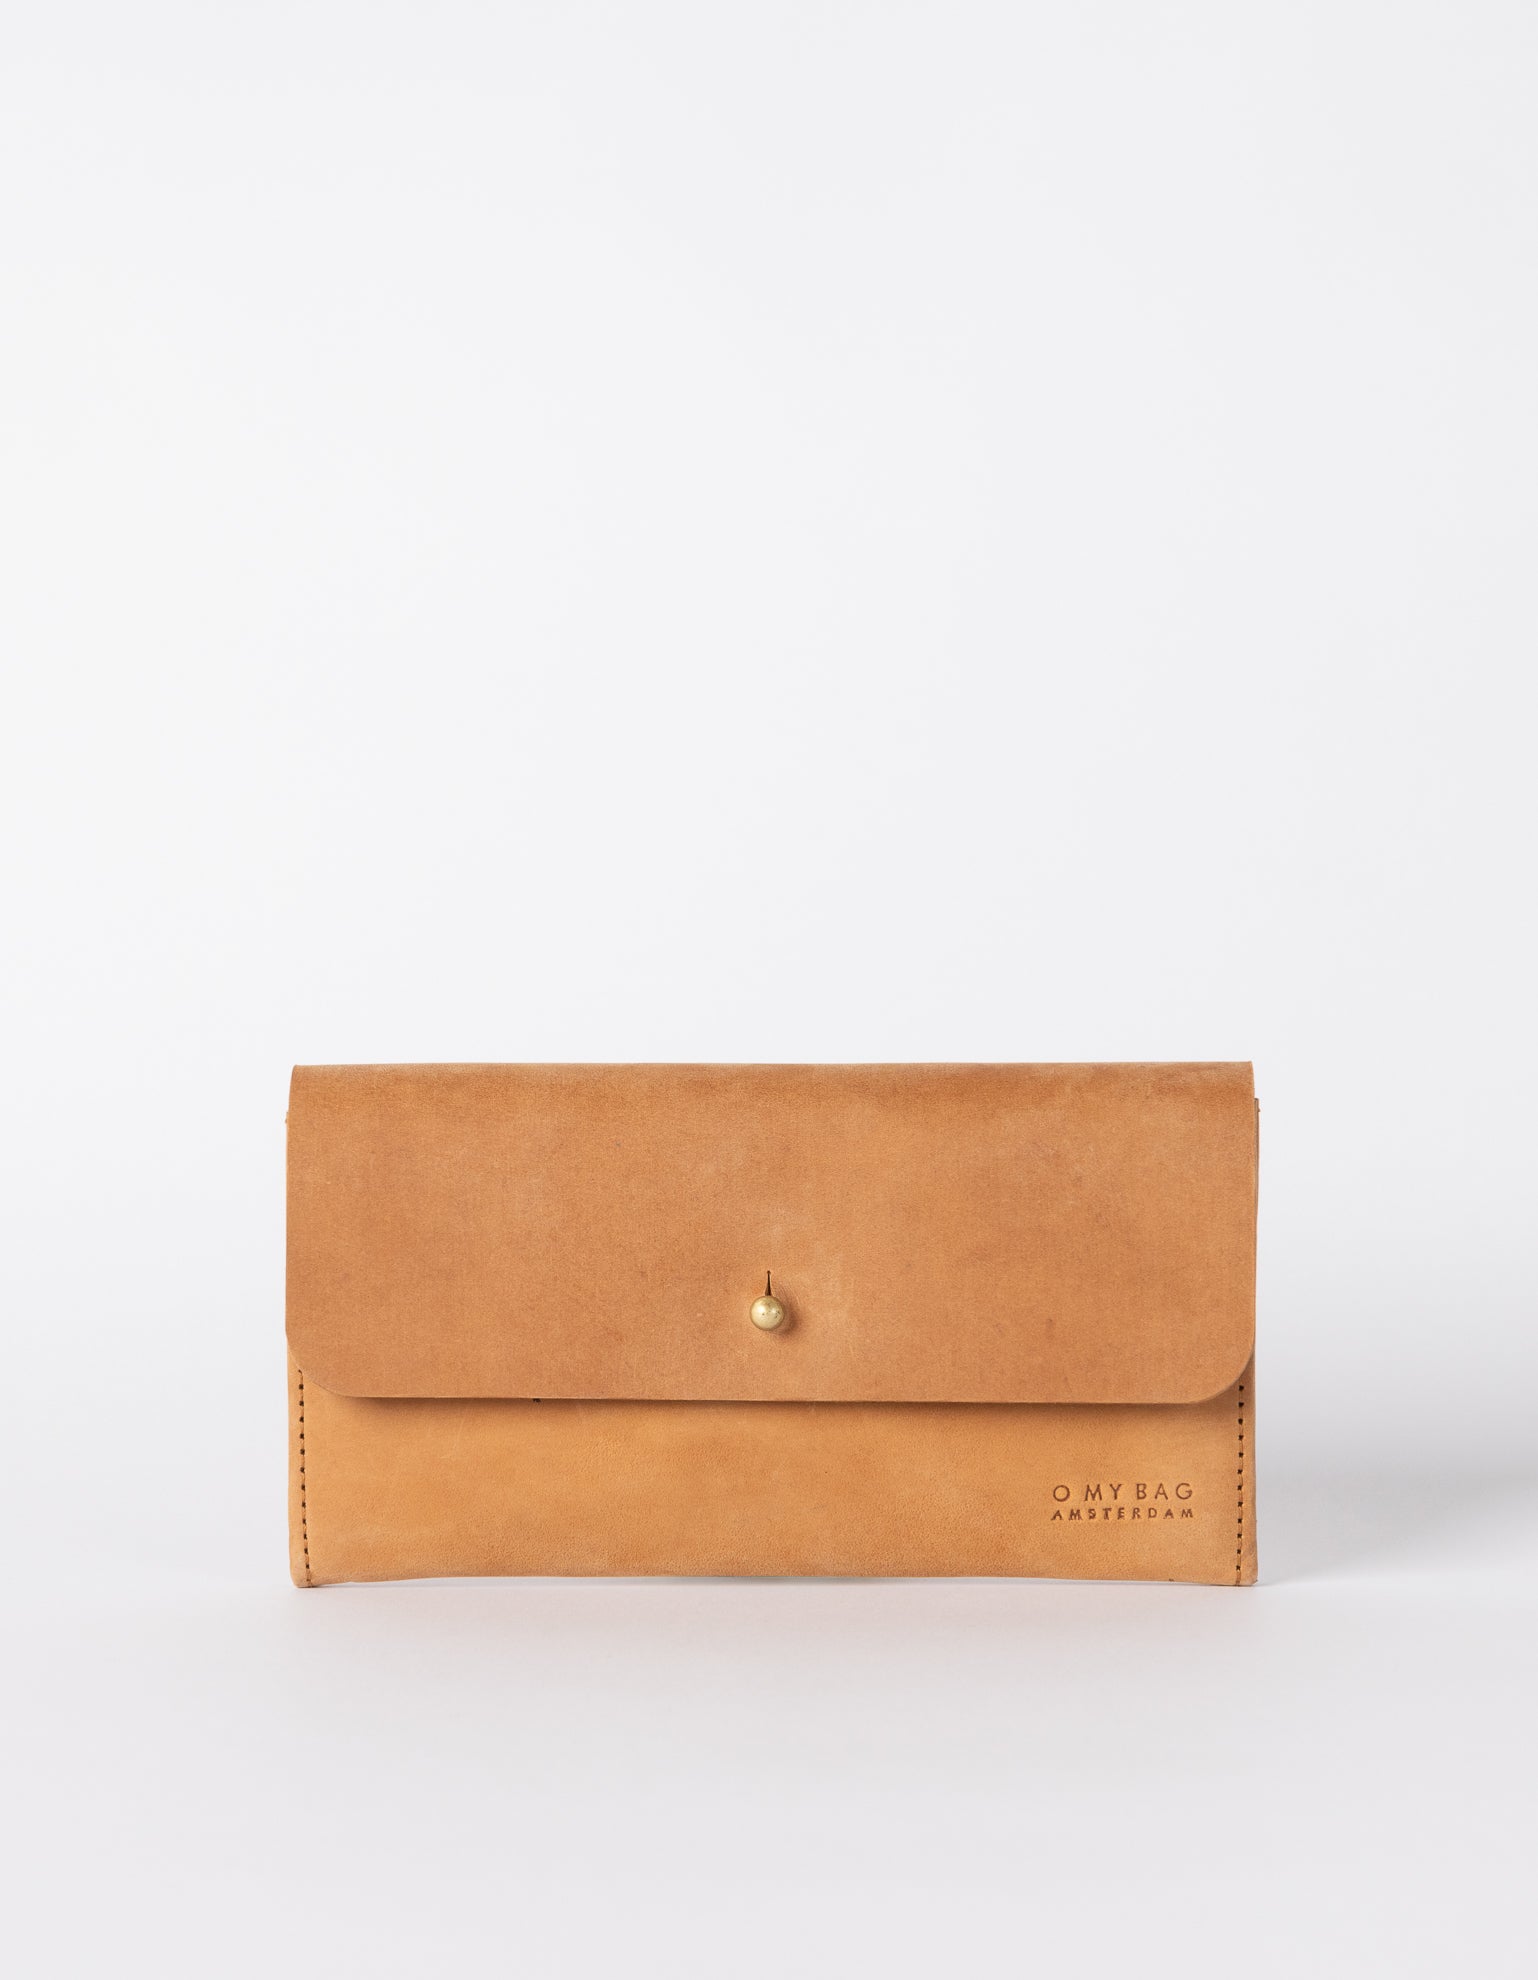 Pixie Pouch Camel Hunter Leather. Rectangular shaped fold over wallet. Front product image.